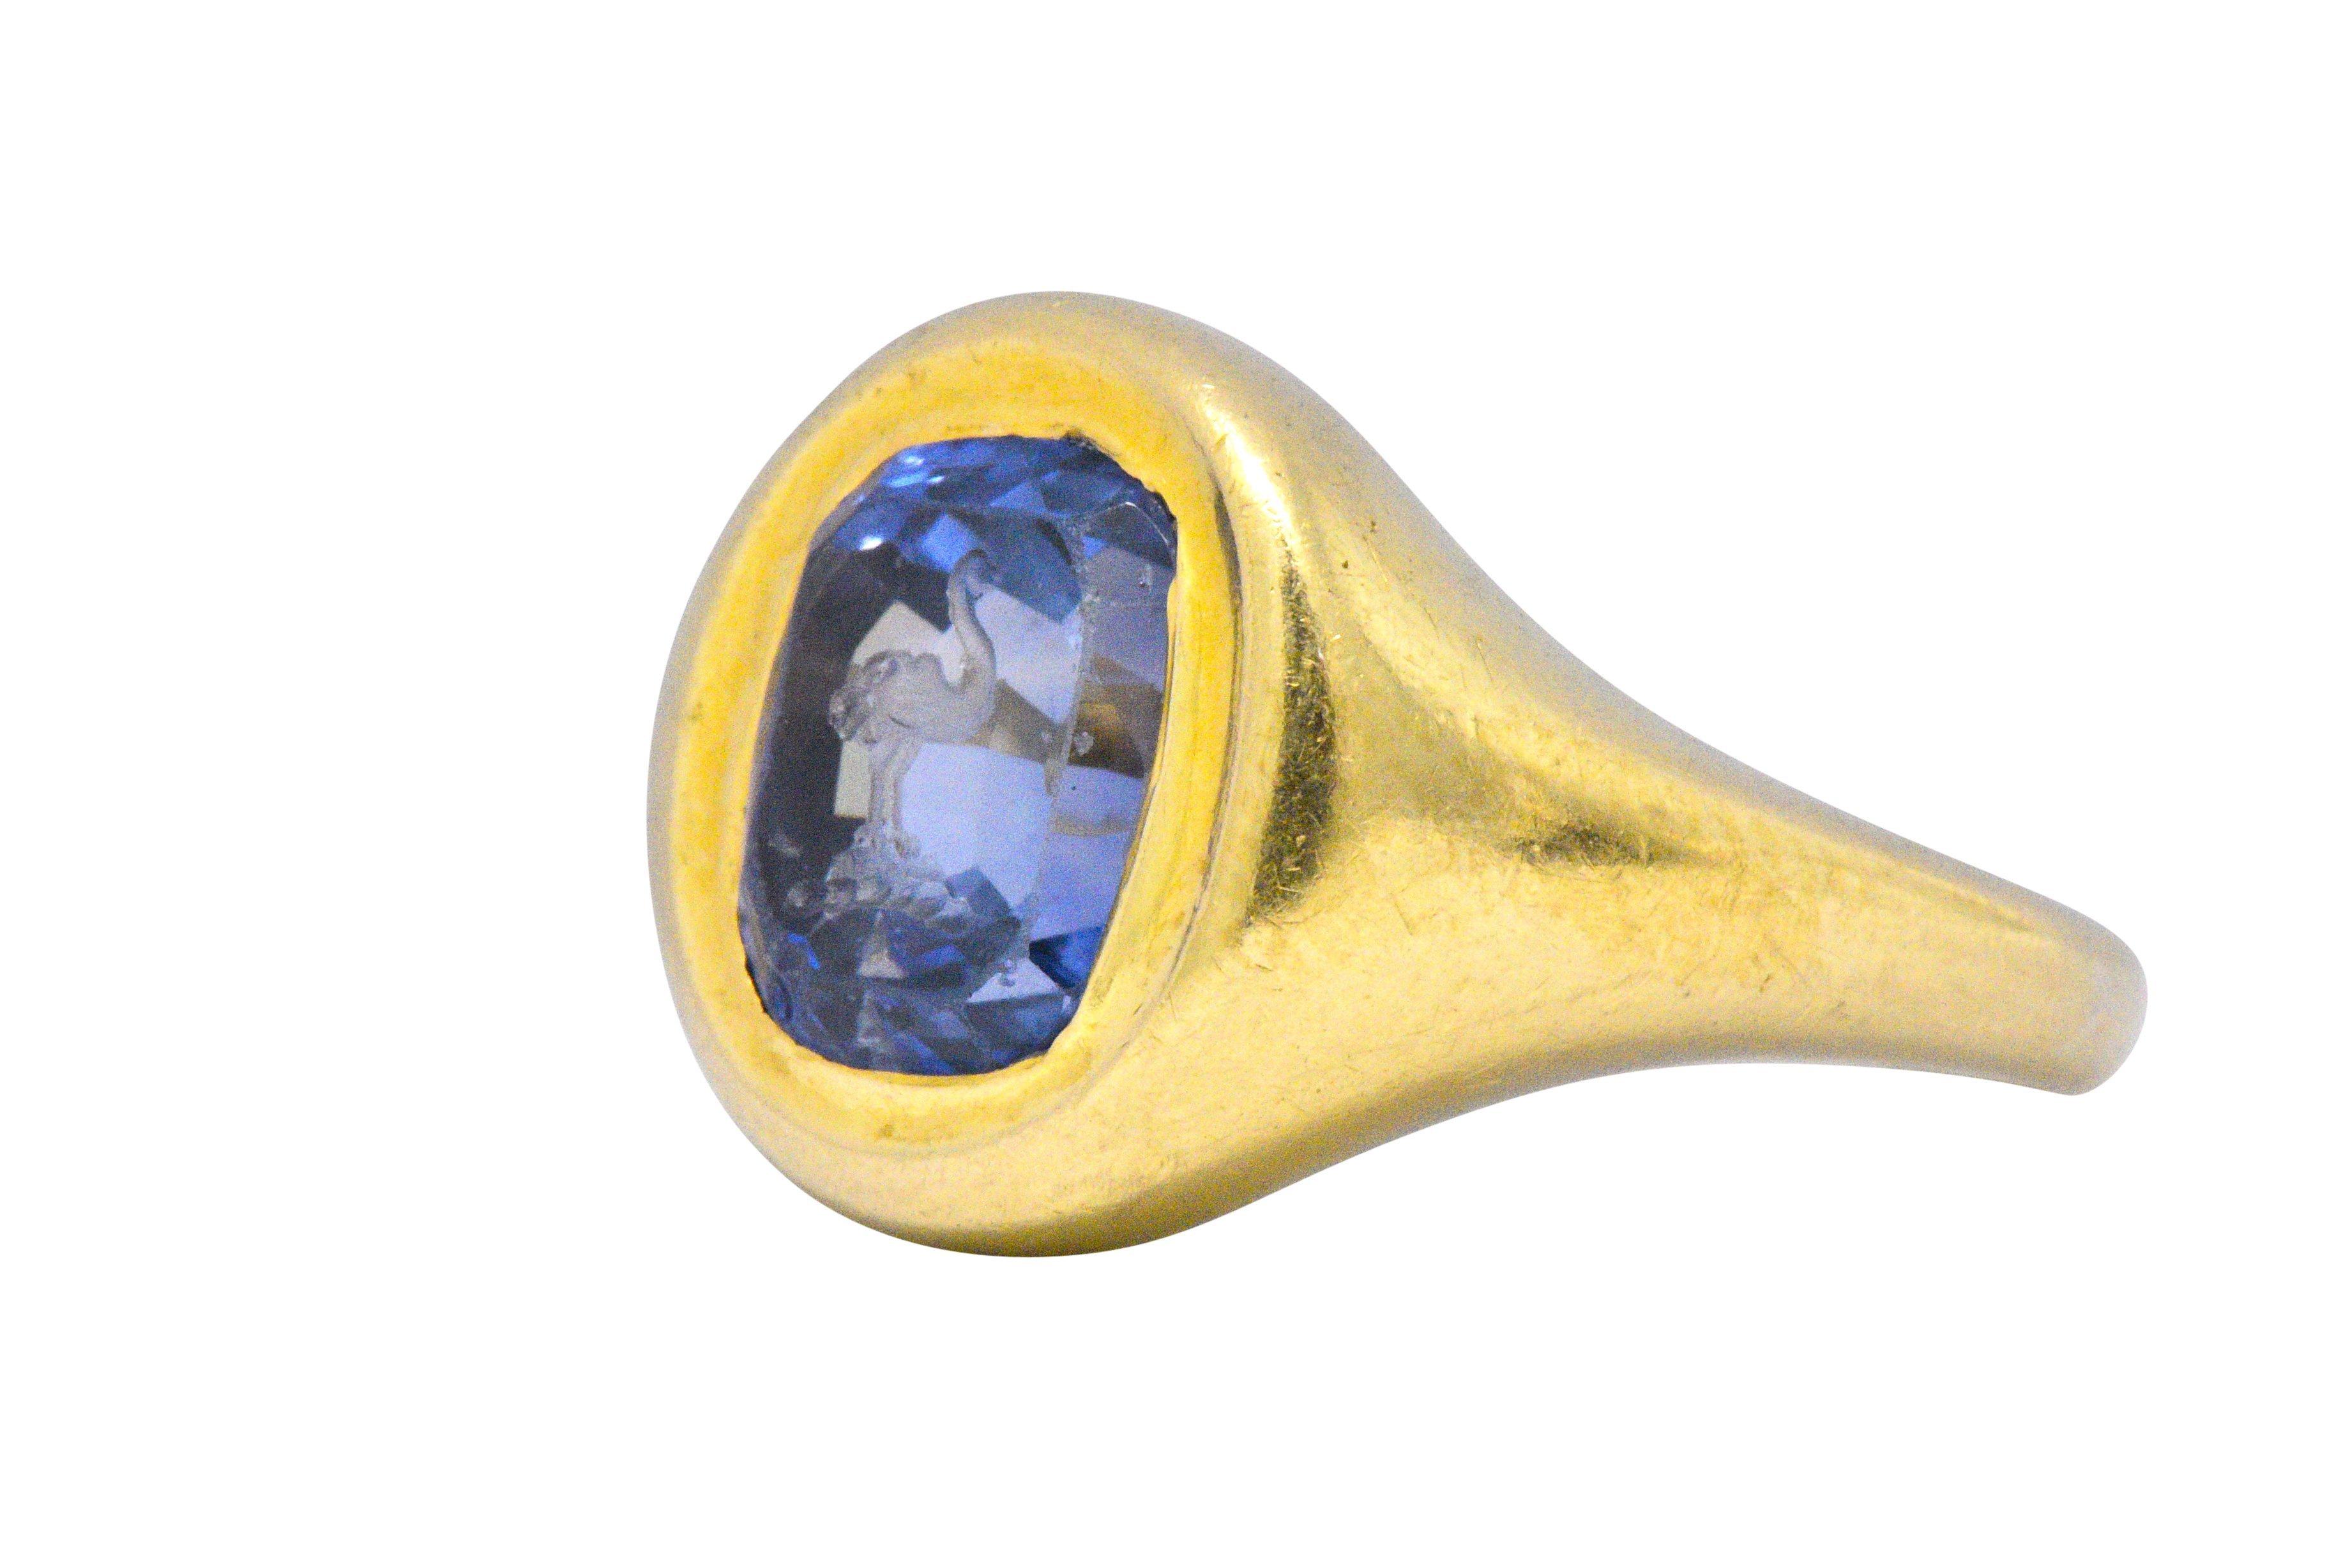 Early, rare antique carved sapphire ring

Centering a hand engraved mixed cut 6 carat natural blue Ceylon sapphire with no heat or clarity enhancements

Hand carved depiction of an ostrich or large bird

Some abrasions present

Measures 14 mm x 14.7